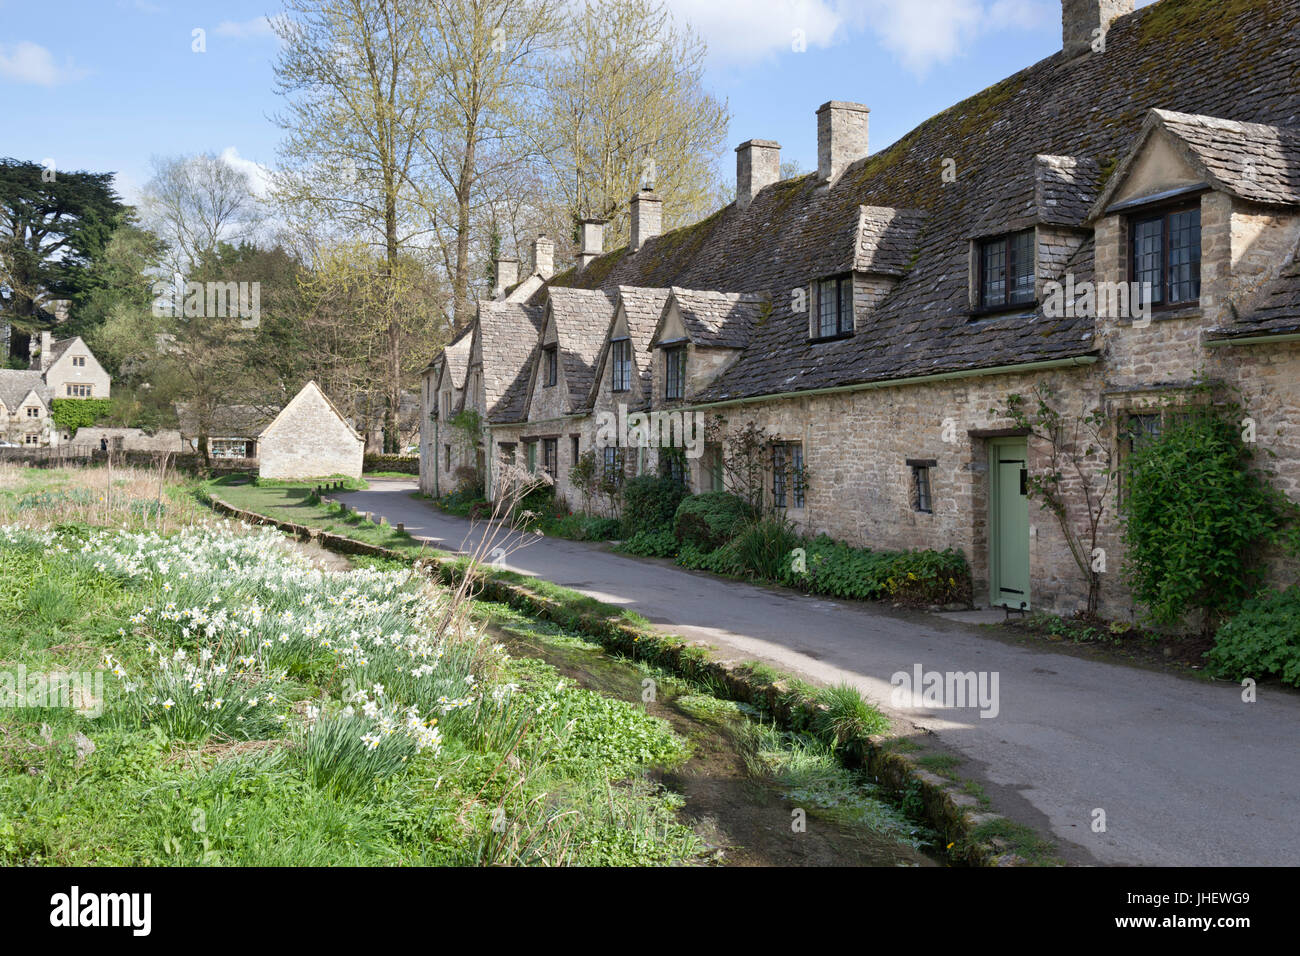 Arlington Row cotswold cottage in pietra, Bibury, Cotswolds, Gloucestershire, England, Regno Unito, Europa Foto Stock